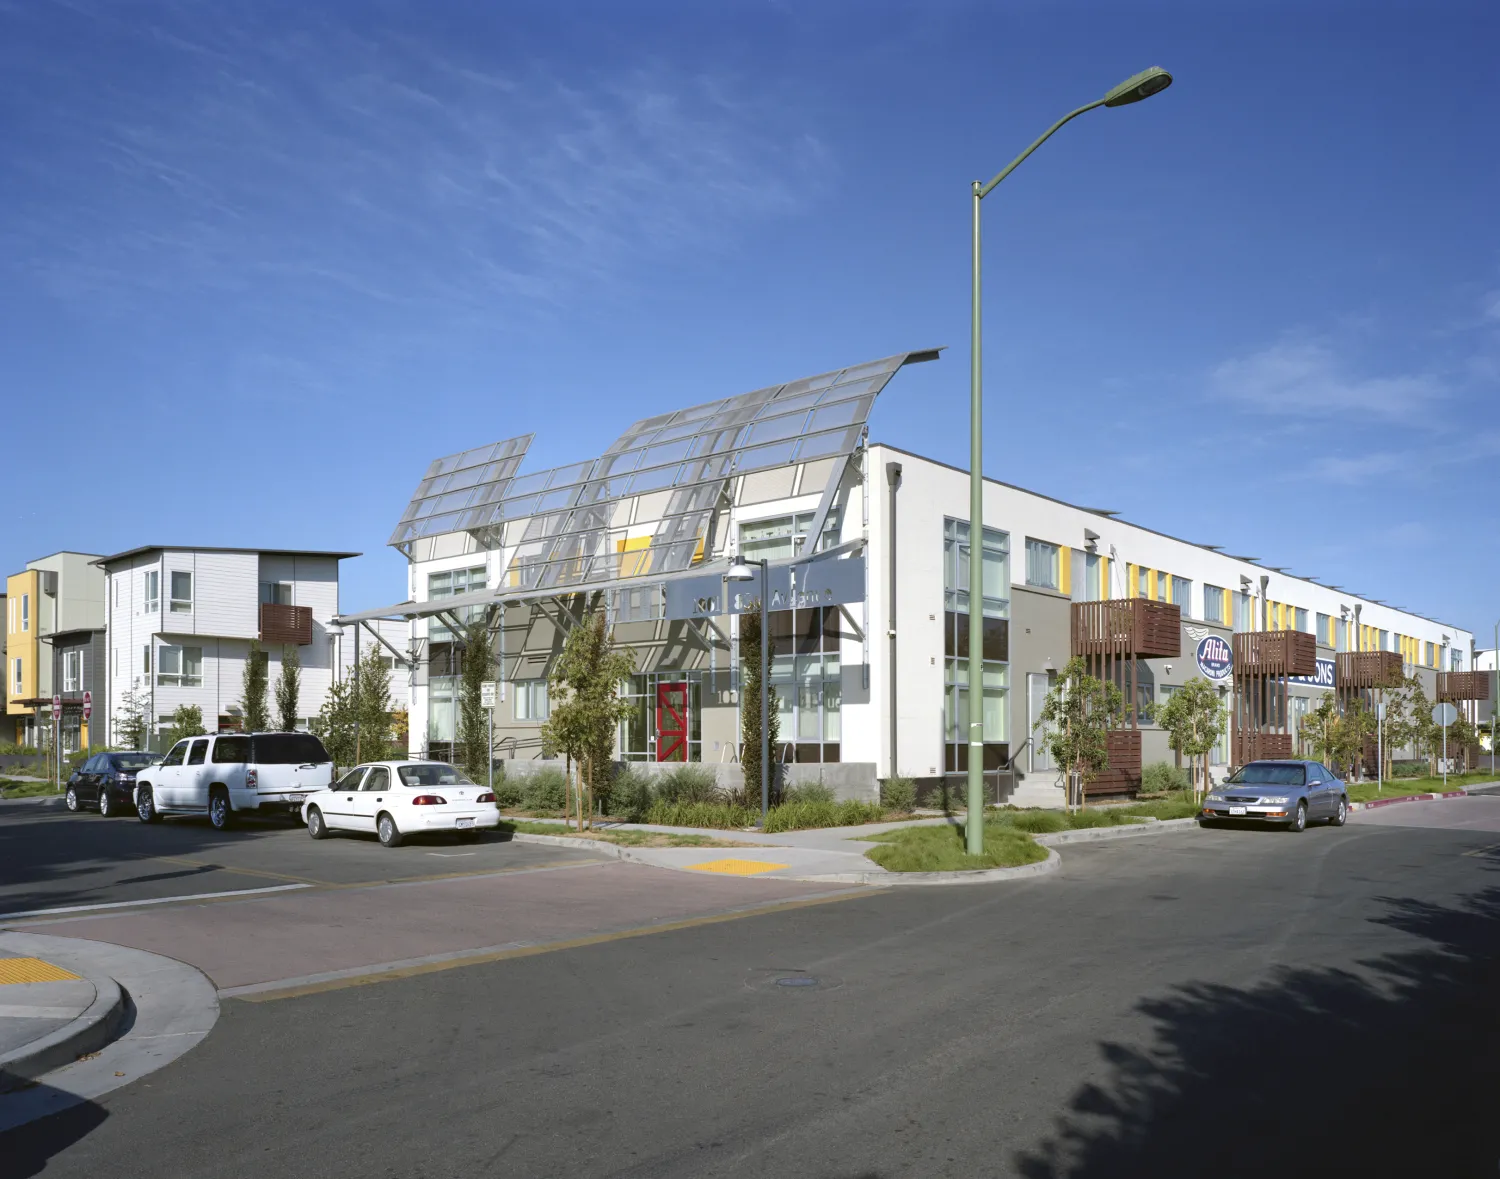 Exterior view of supportive housing units at Tassafaronga Village in East Oakland, CA. 